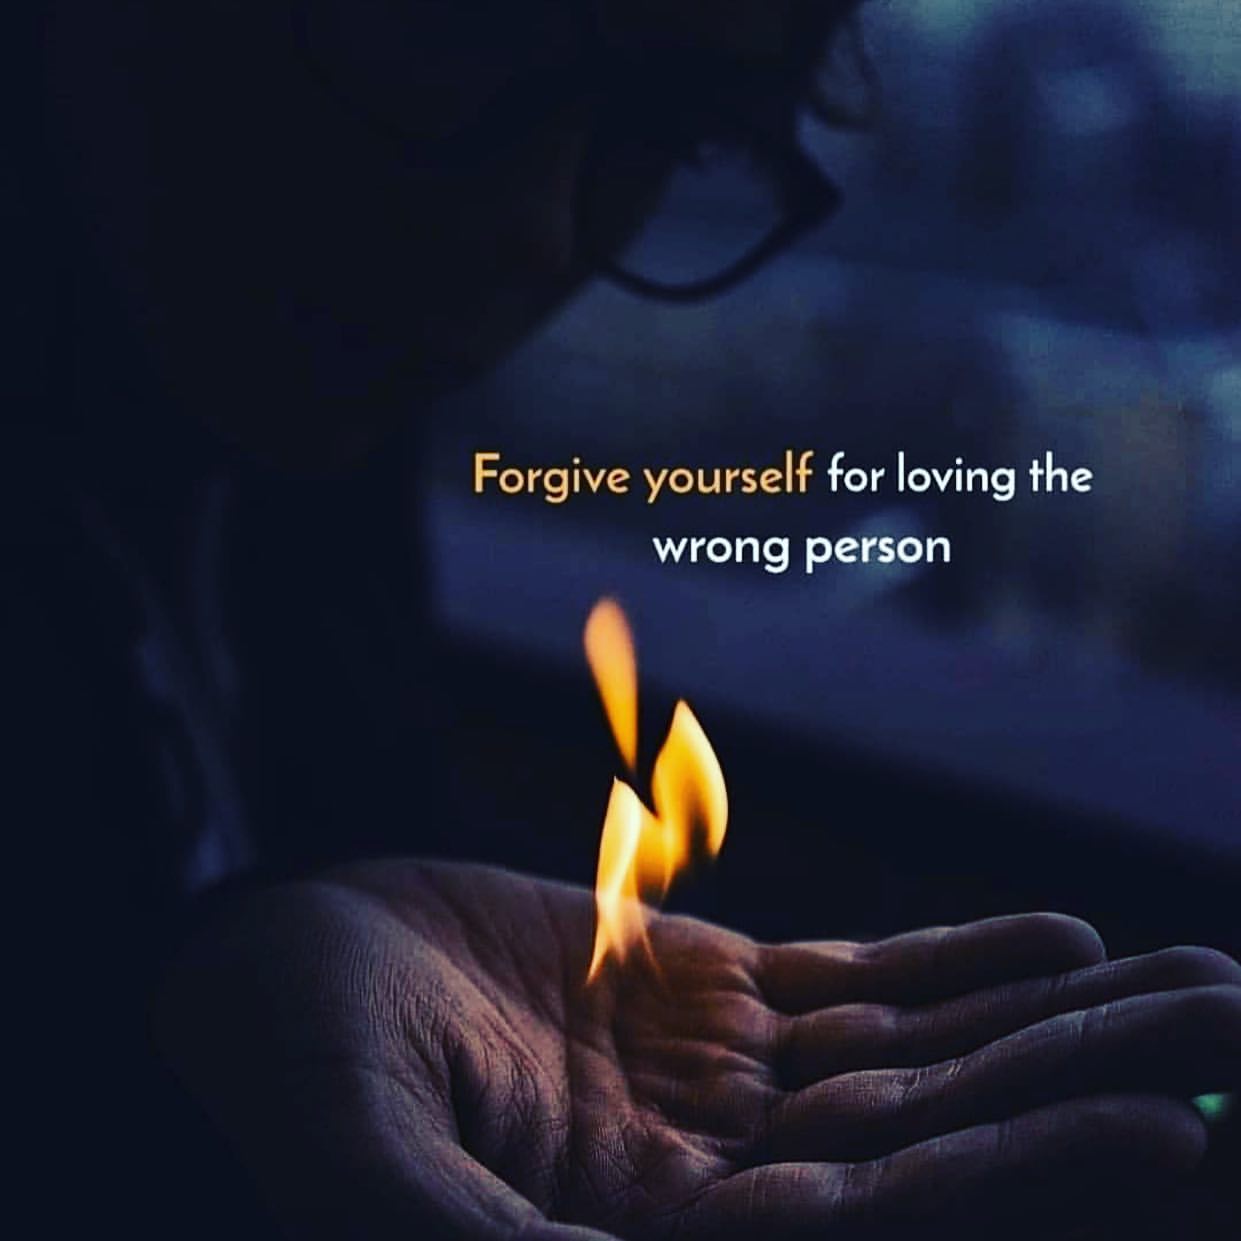 Forgive yourself for loving the wrong person.